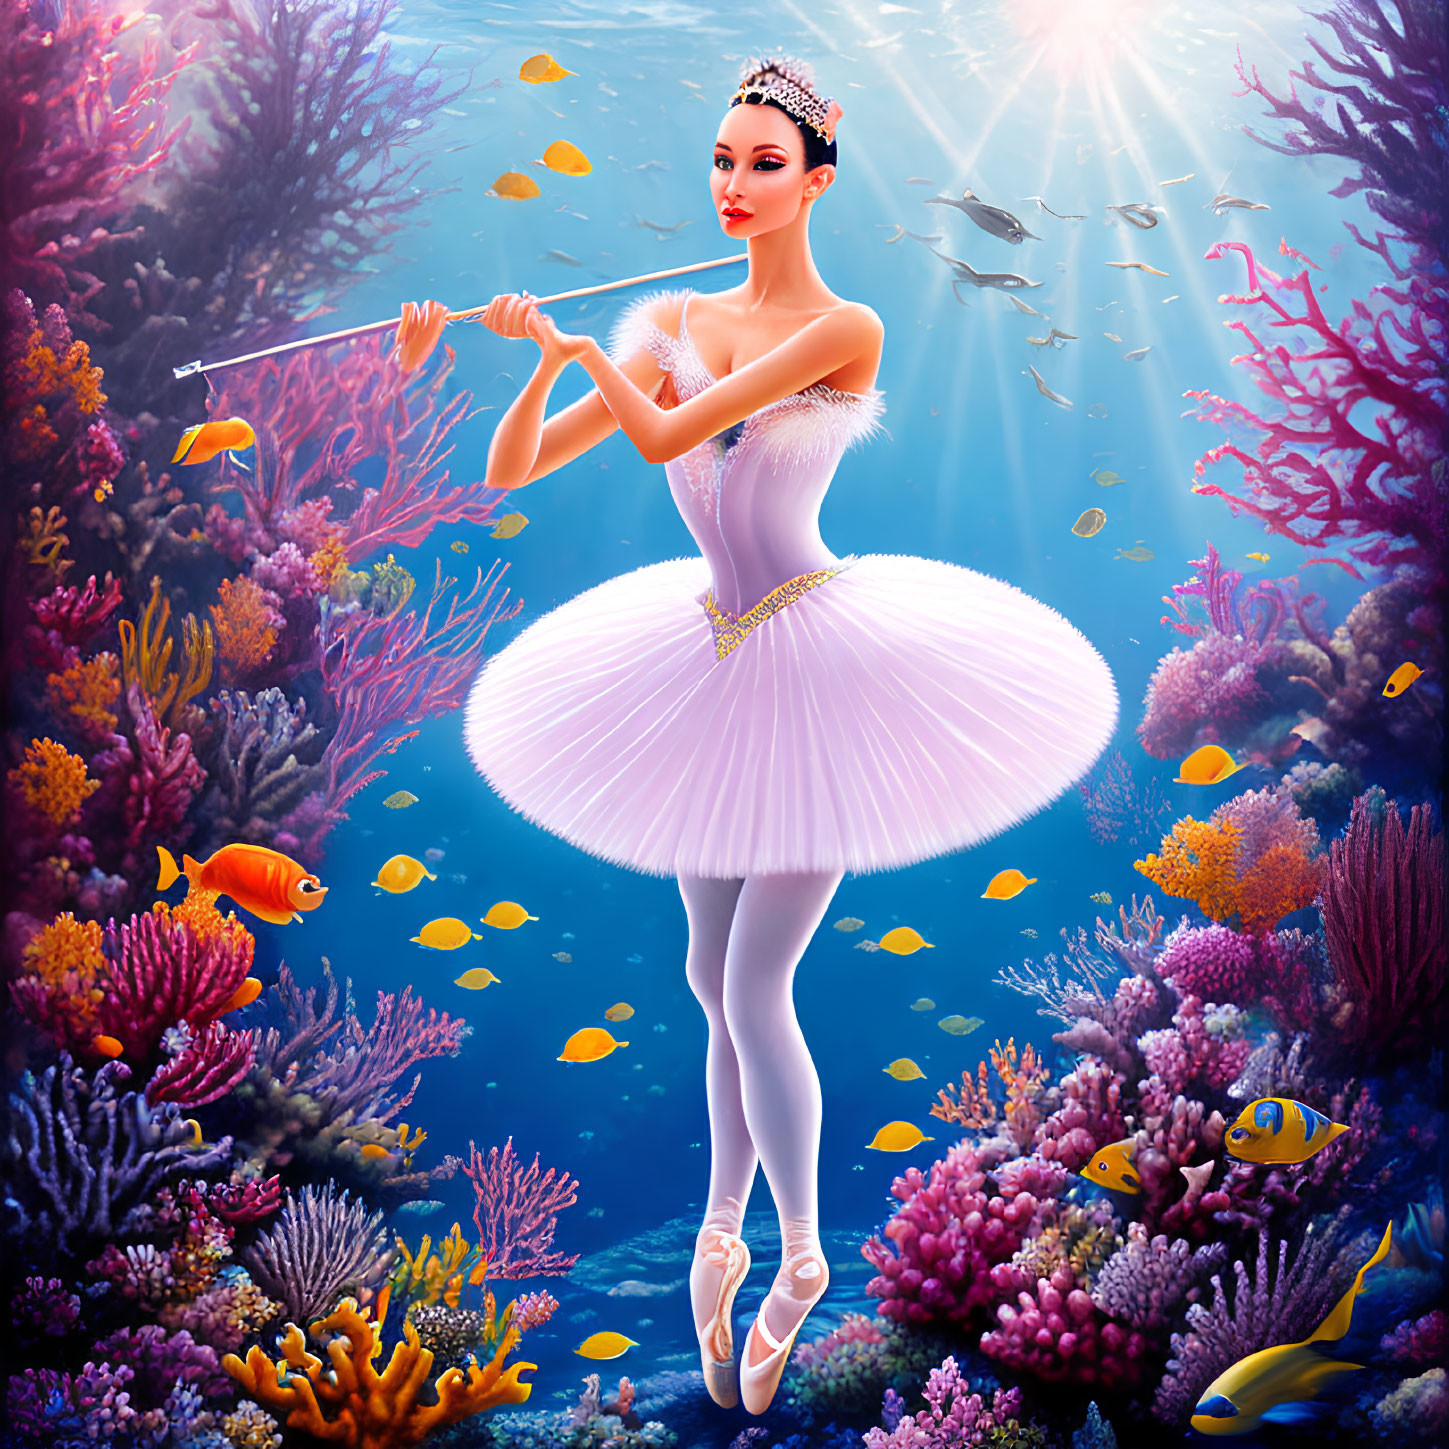 Graceful animated ballerina in white and purple tutu dances underwater among colorful coral reefs and tropical